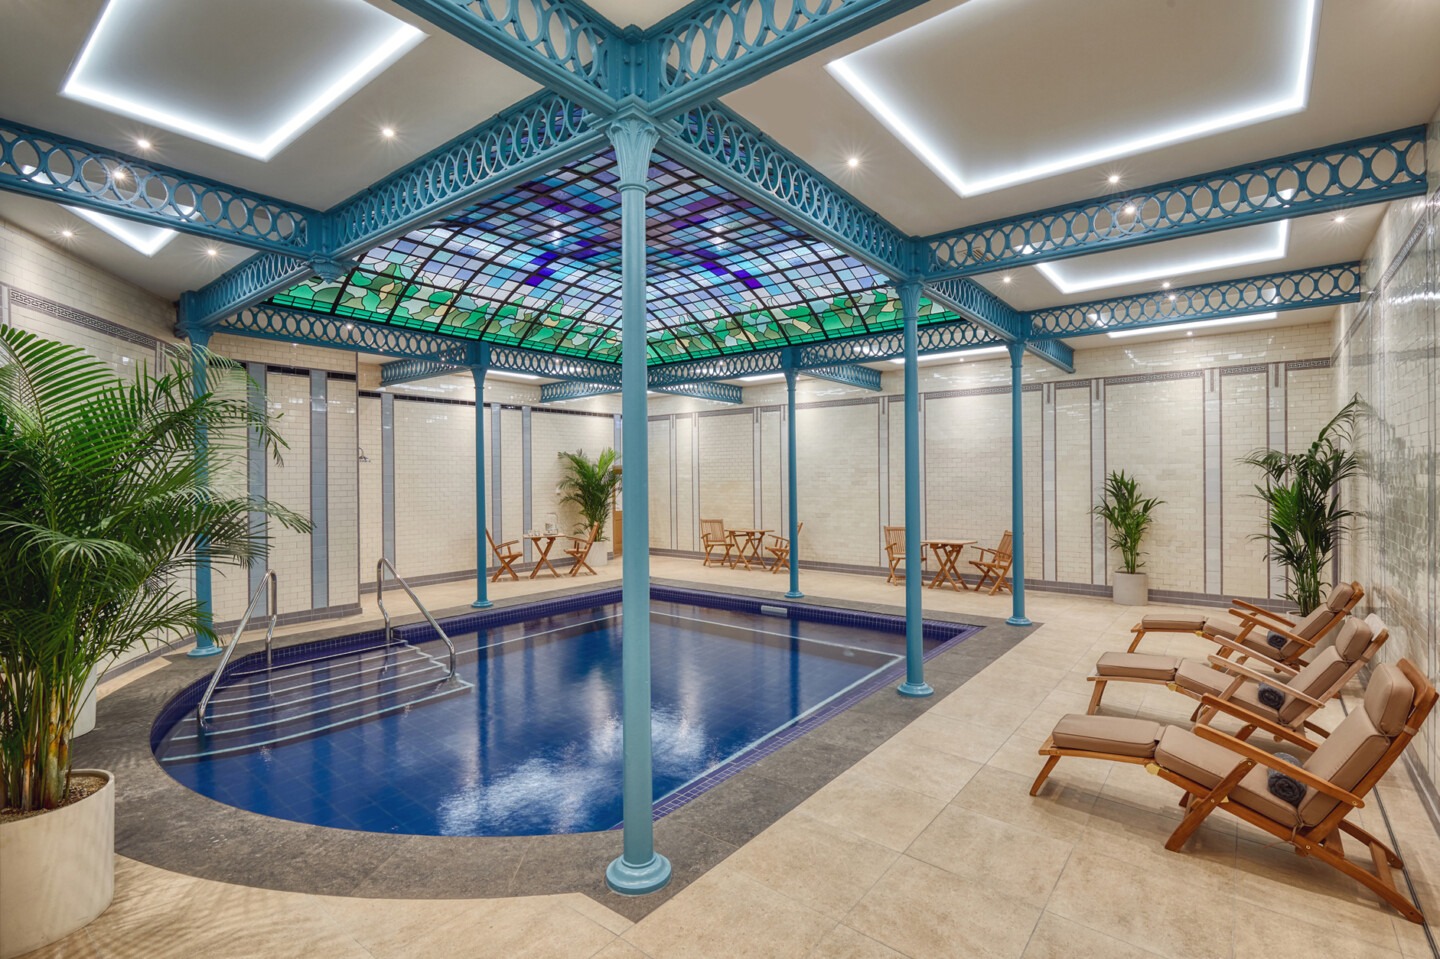 Buxton Crescent Spa Hotel, Derbyshire - Thermal Pool (NCN)